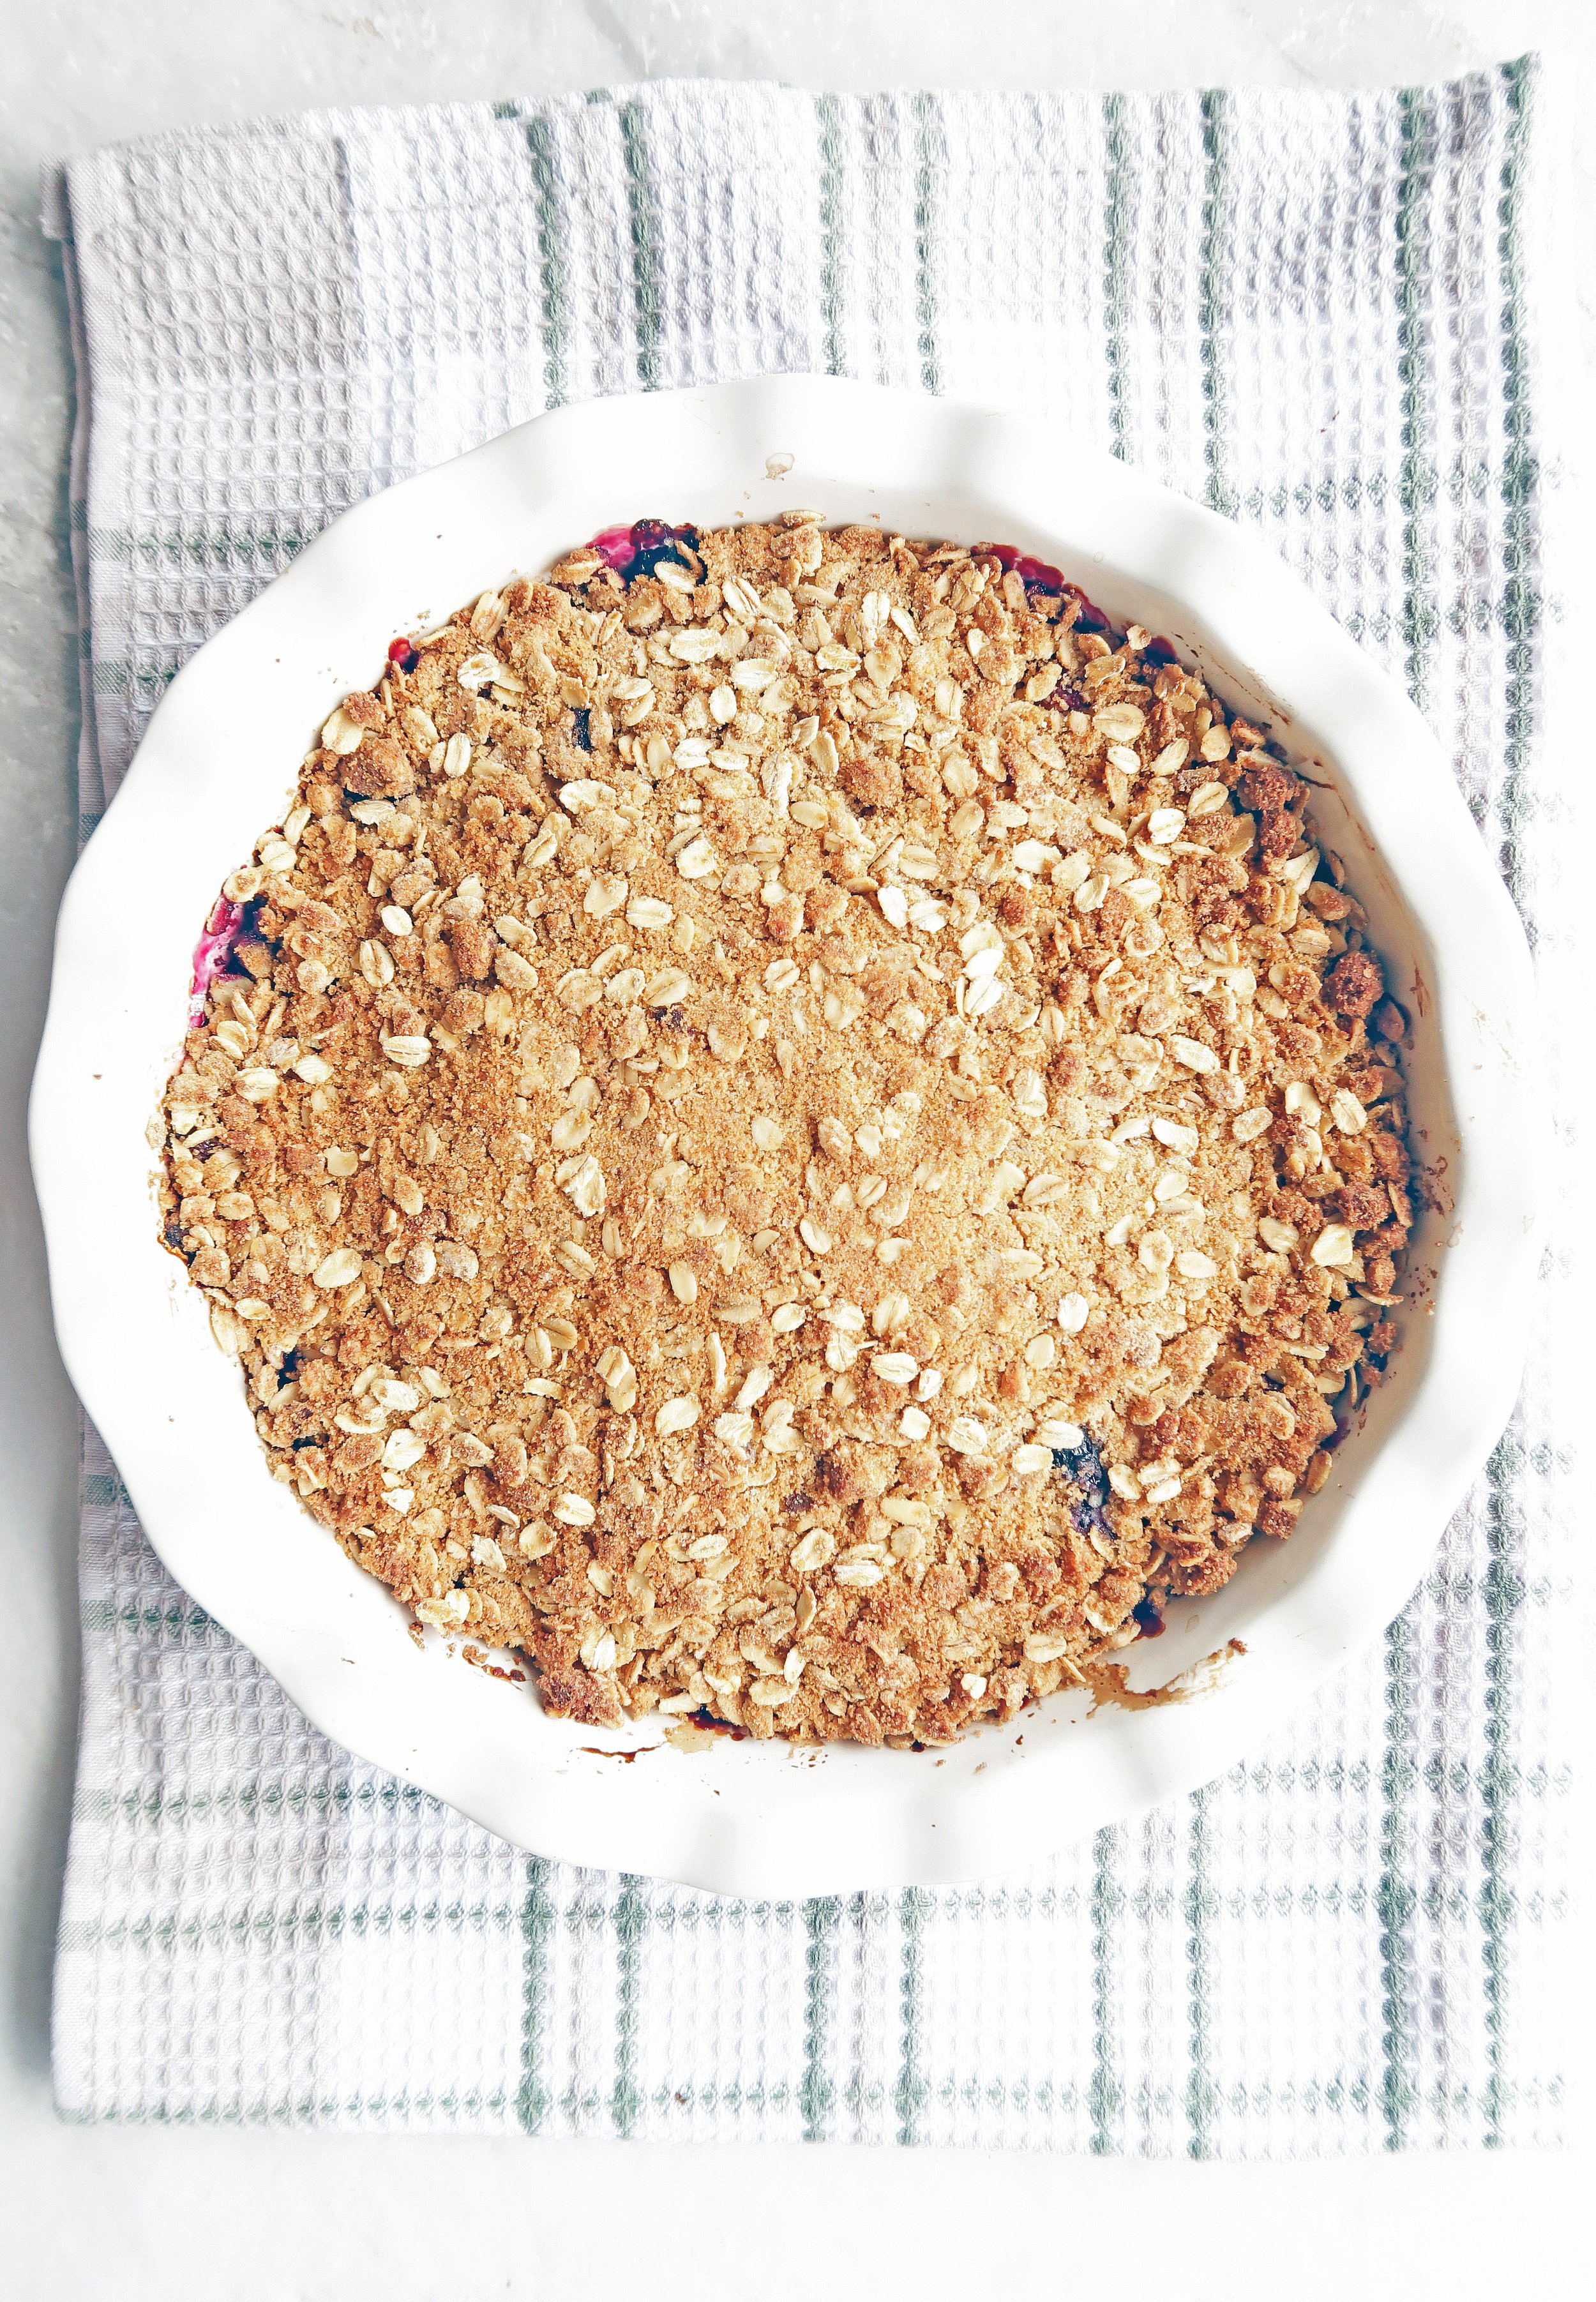 Baked oat crisp topping on top of cherries and blueberries.